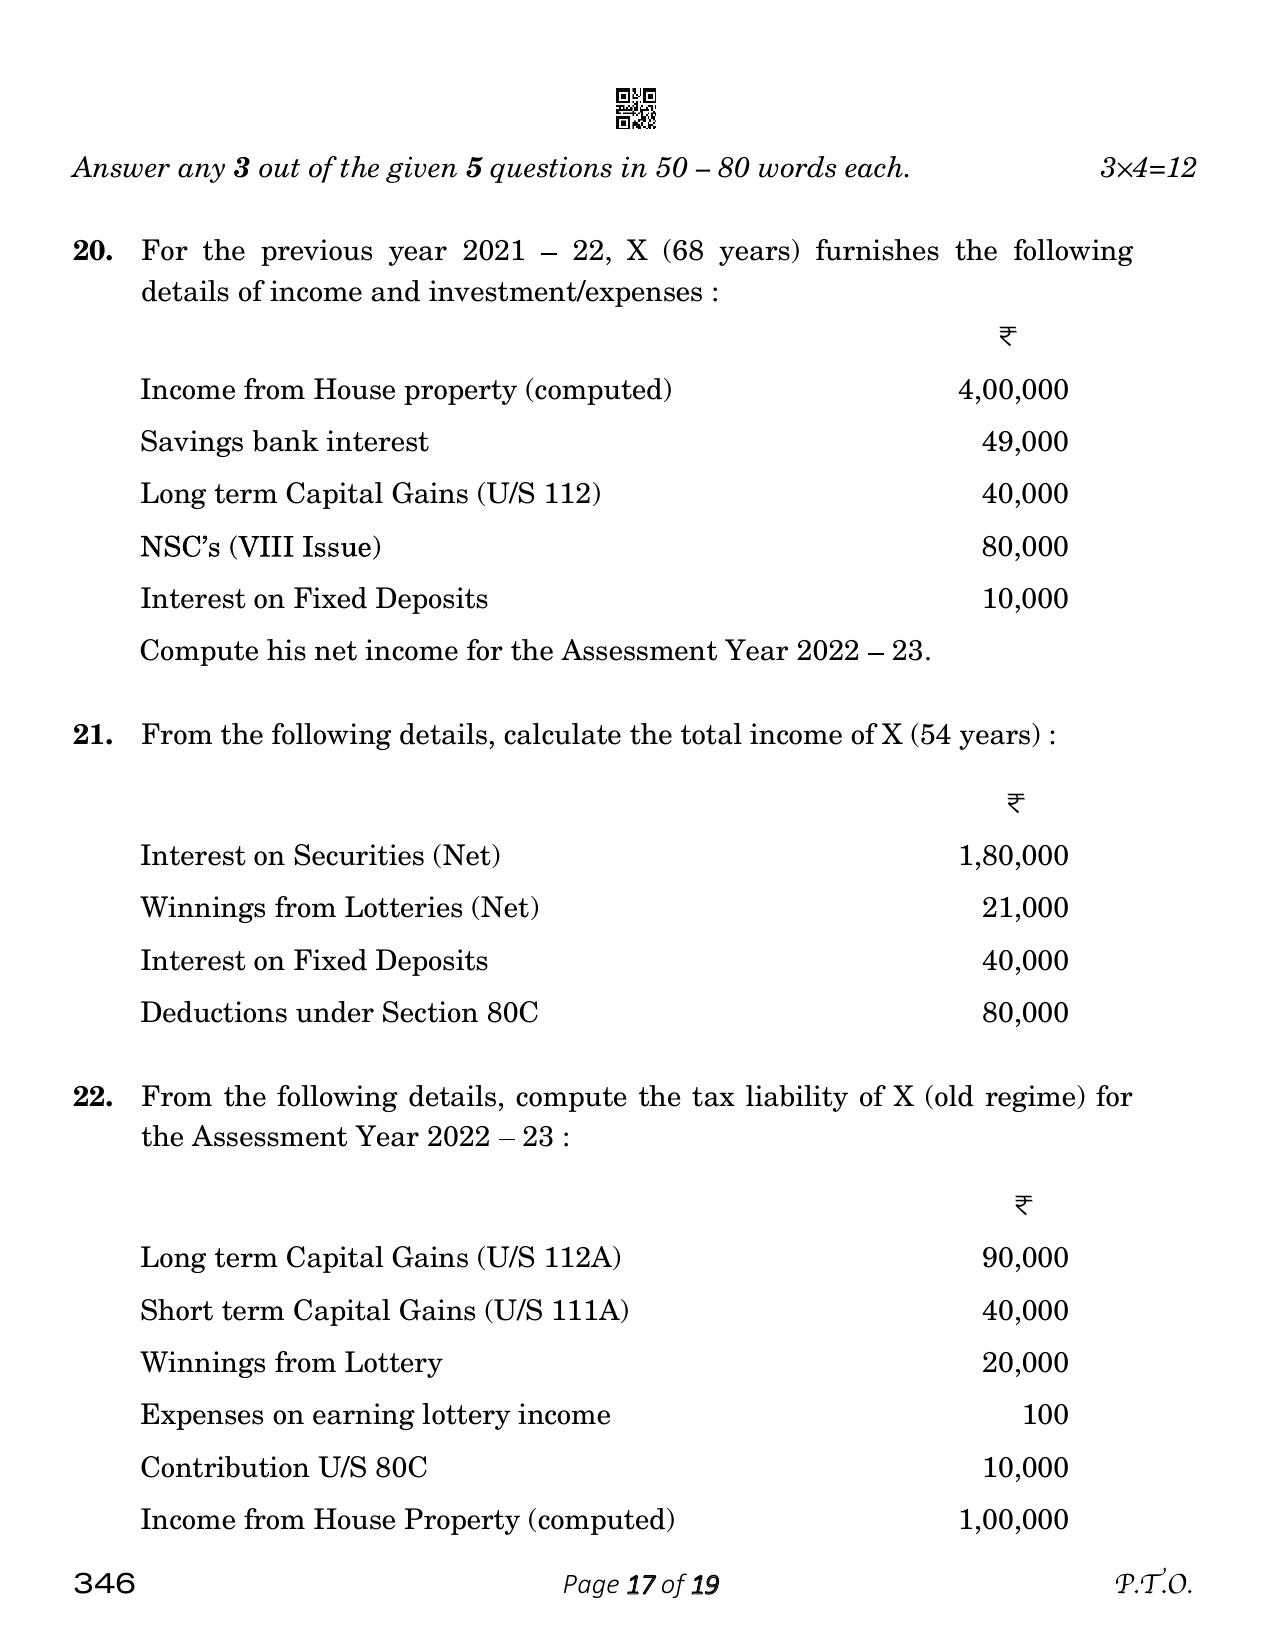 CBSE Class 12 Taxation (Compartment) 2023 Question Paper - Page 17